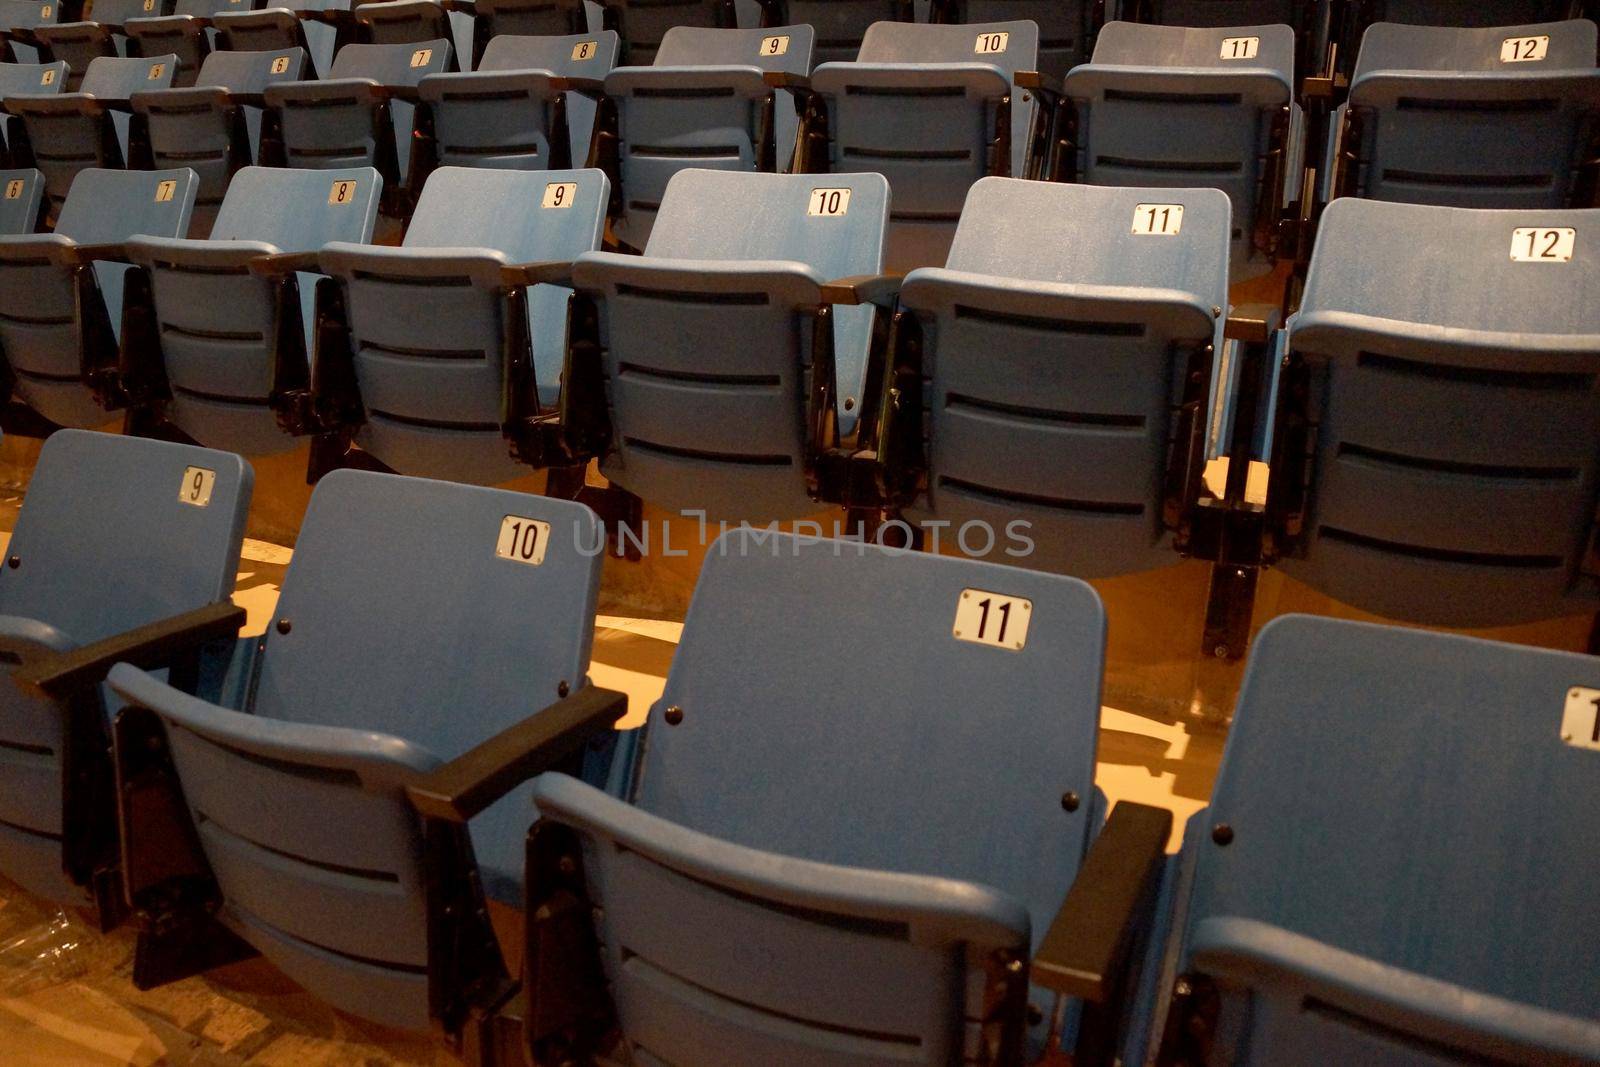 Light Blue Seat with armrests at the San Jose Event Center in San Jose, California.  Numbered Seats 5, 6, 7, 8, 9, 10, 11, 12 visible.